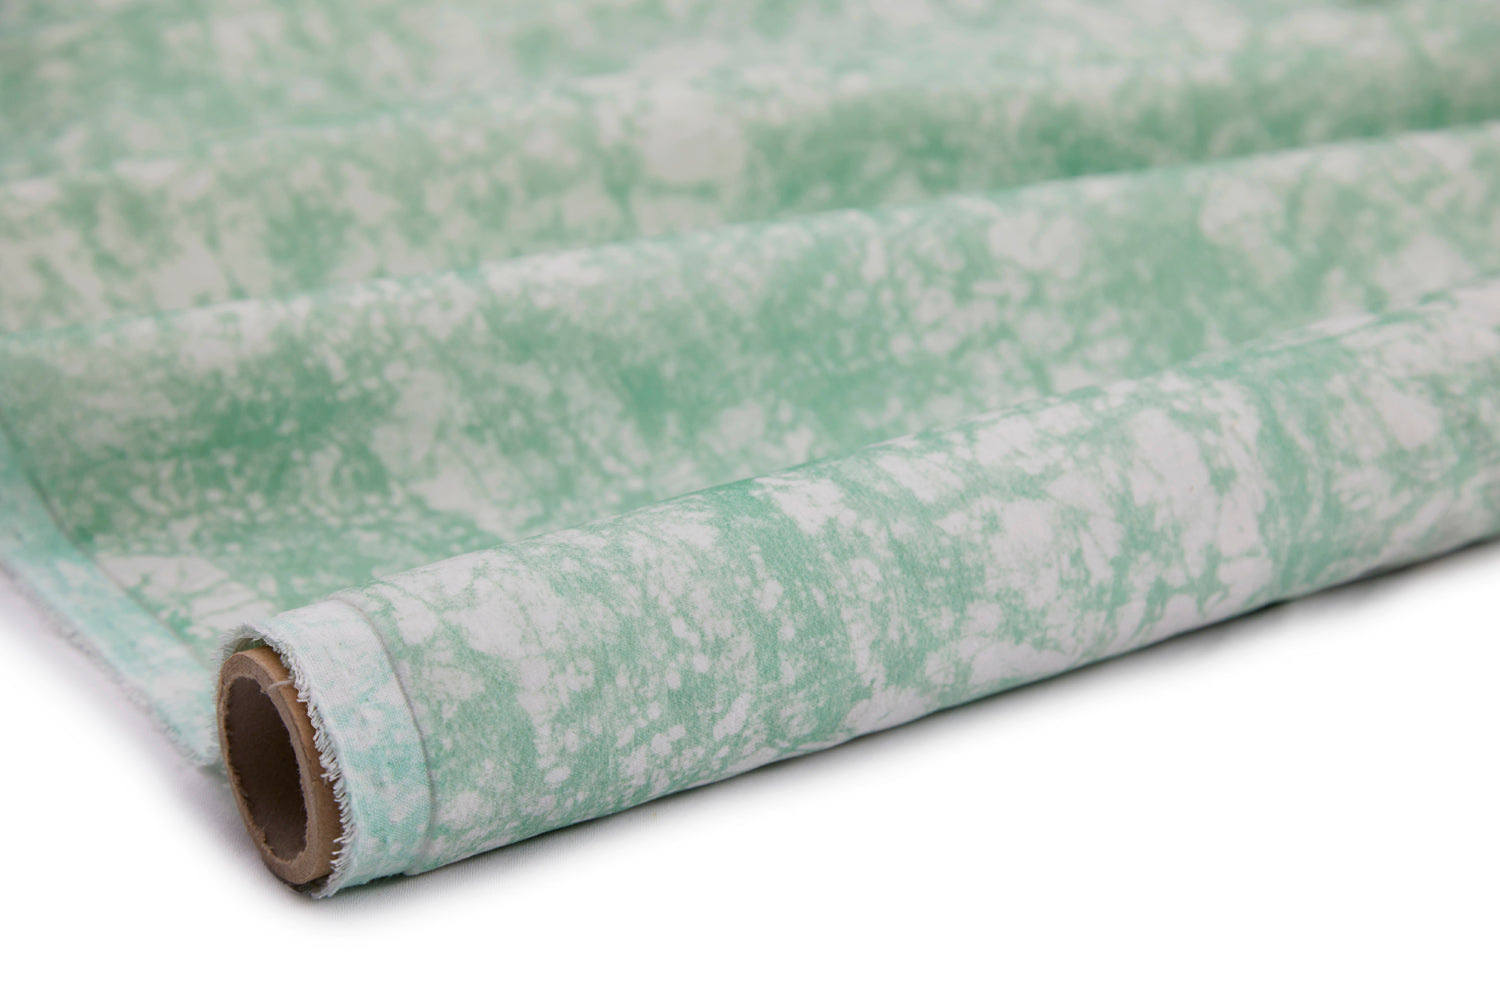 Partially unrolled fabric in an organic crumpled texture in light green on a cream field.